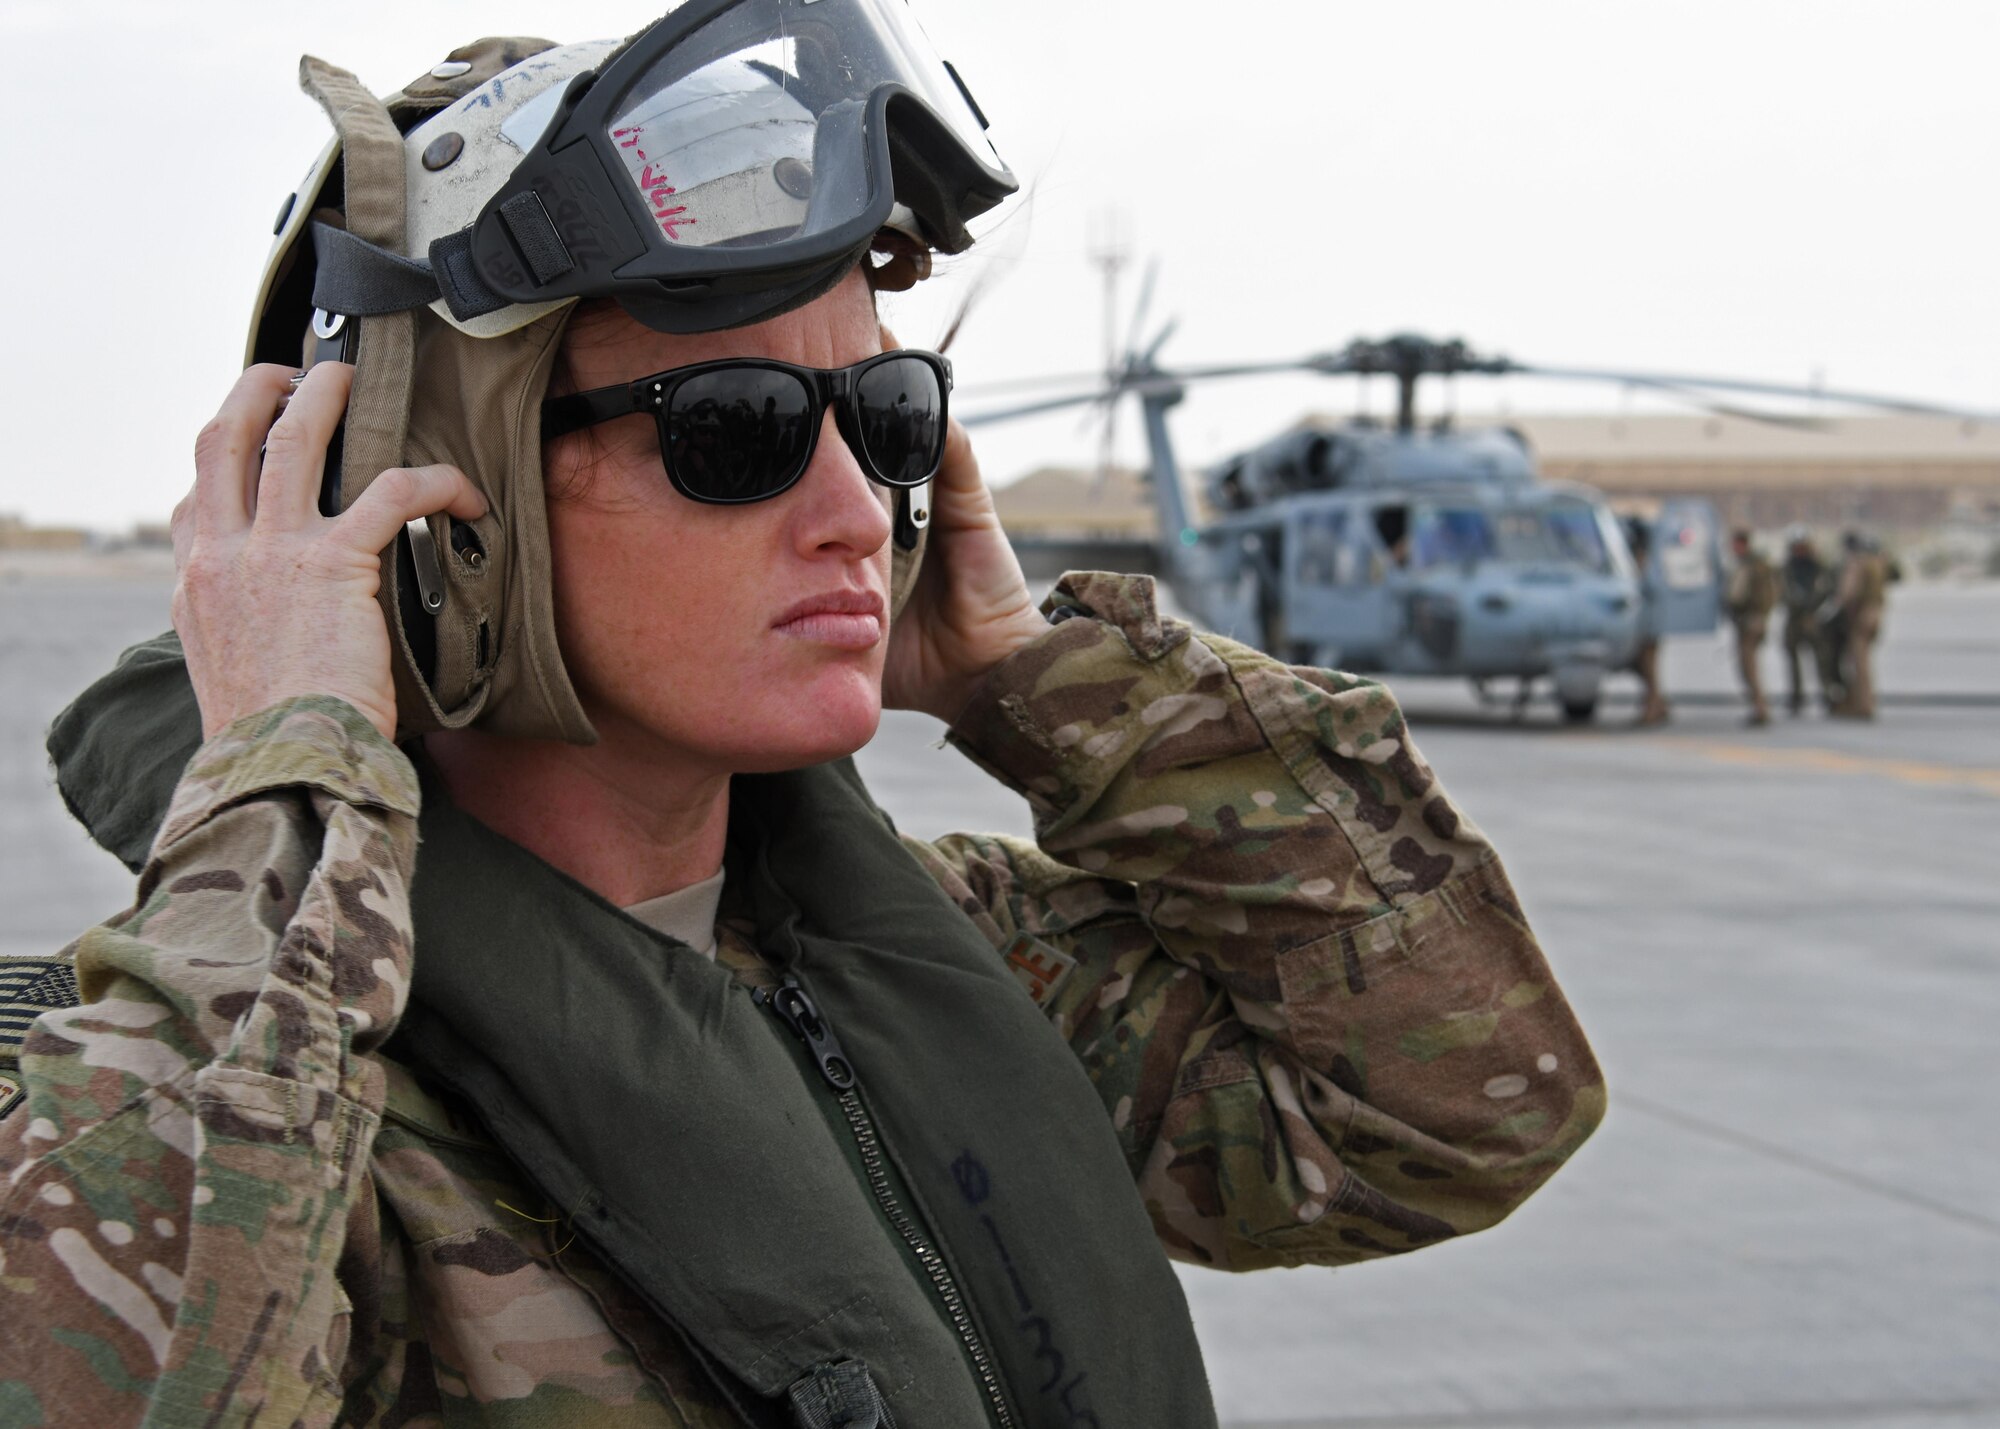 U.S. Air Force 1st Lt. Bridget Henry, a critical care nurse with the 379th Expeditionary Medical Group, dons a helmet during a flight safety briefing at Al Udeid Air Base, Qatar, Jan. 23, 2016. Henry was part of a mobile forward surgical team - expeditionary critical care team taking part in an exercise onboard the HMS Ocean, the Royal Navy’s flagship. (U.S. Air Force photo by Senior Airman Miles Wilson)